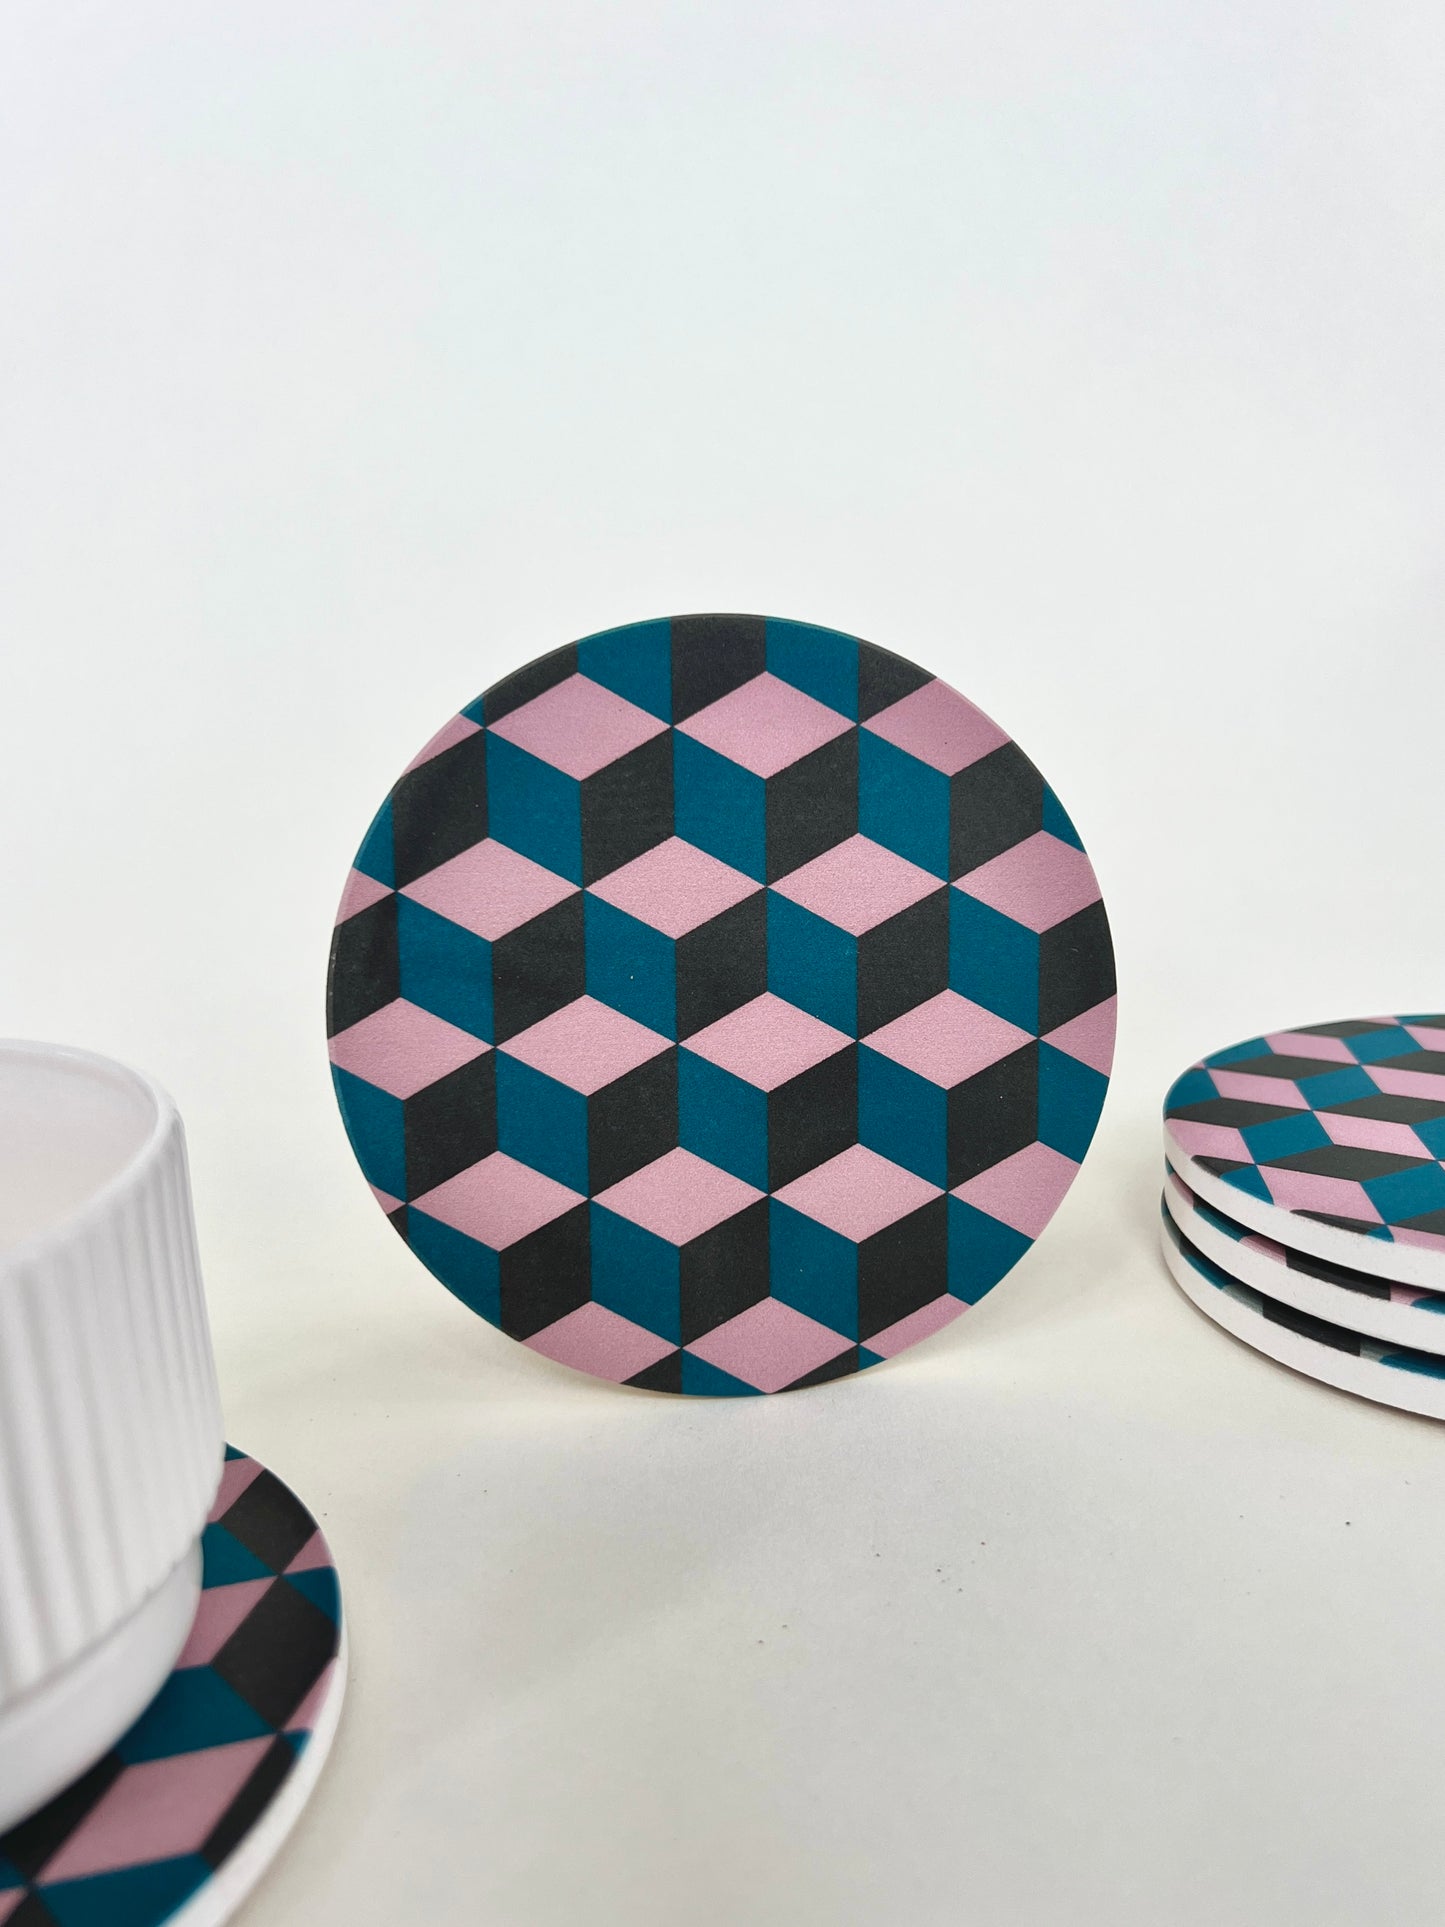 CUBES COASTERS set of 4 ceramic absorbent coasters